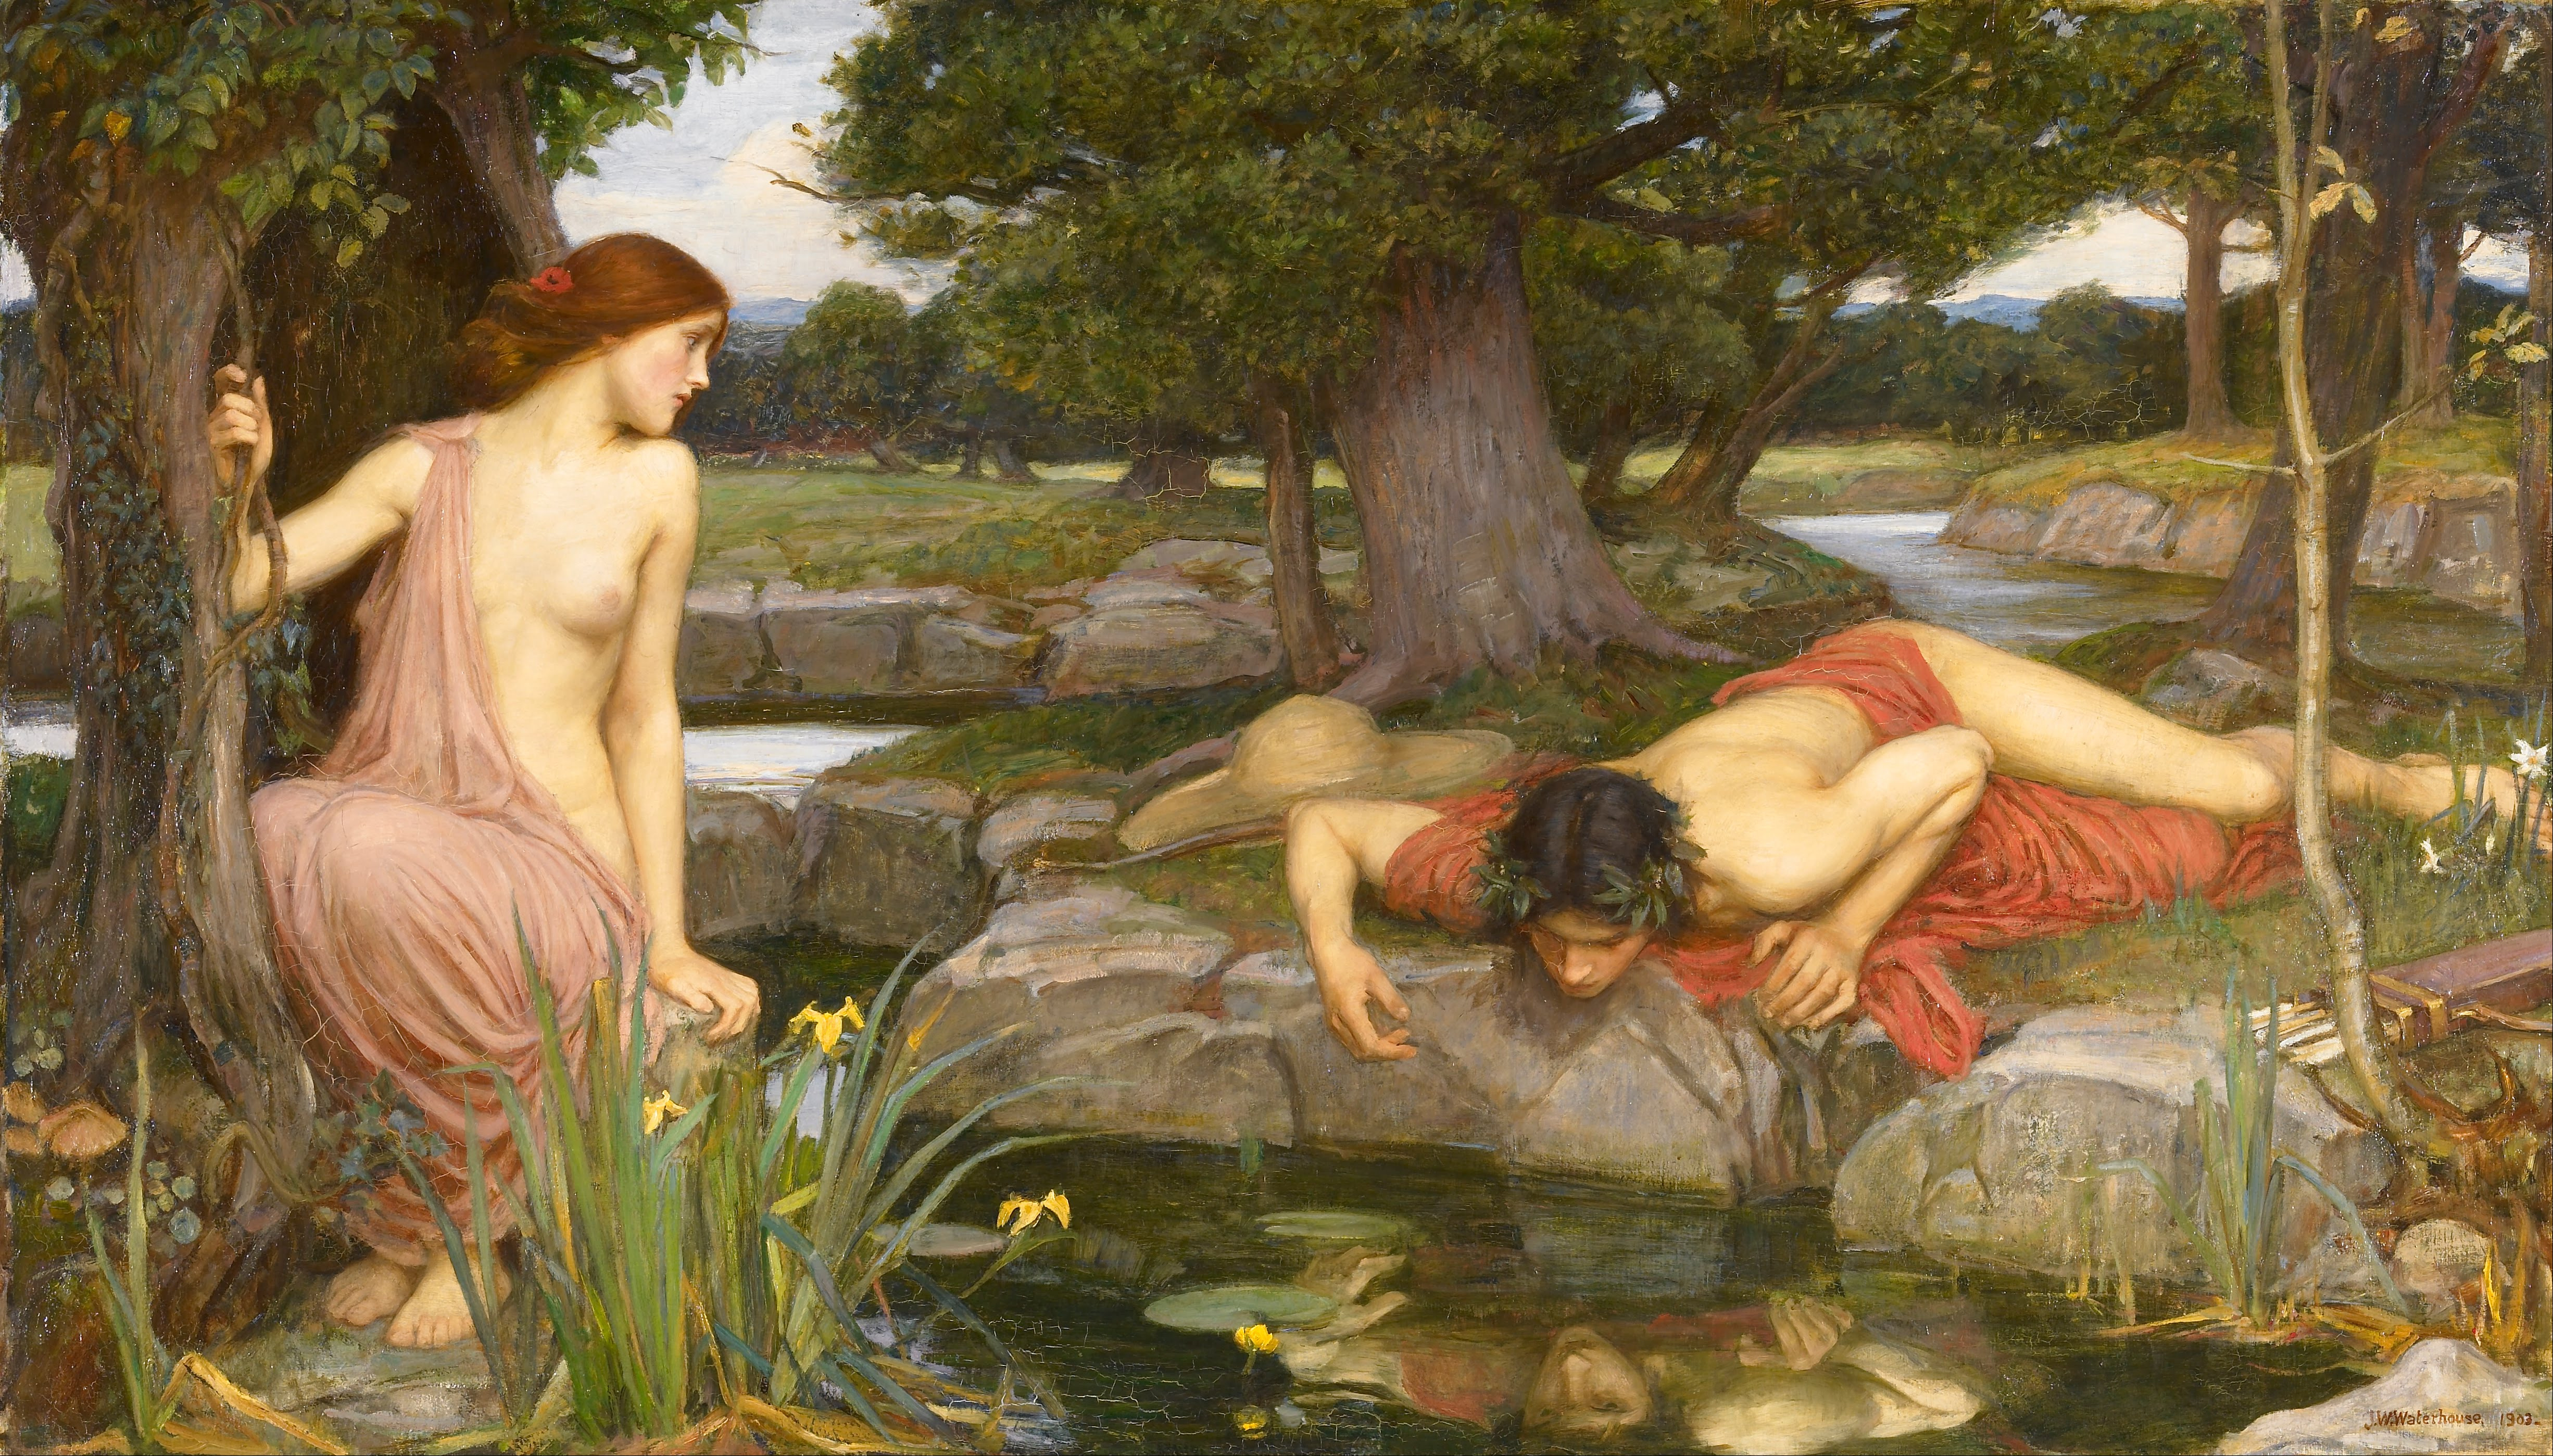 A painting of Echo and Narcissus